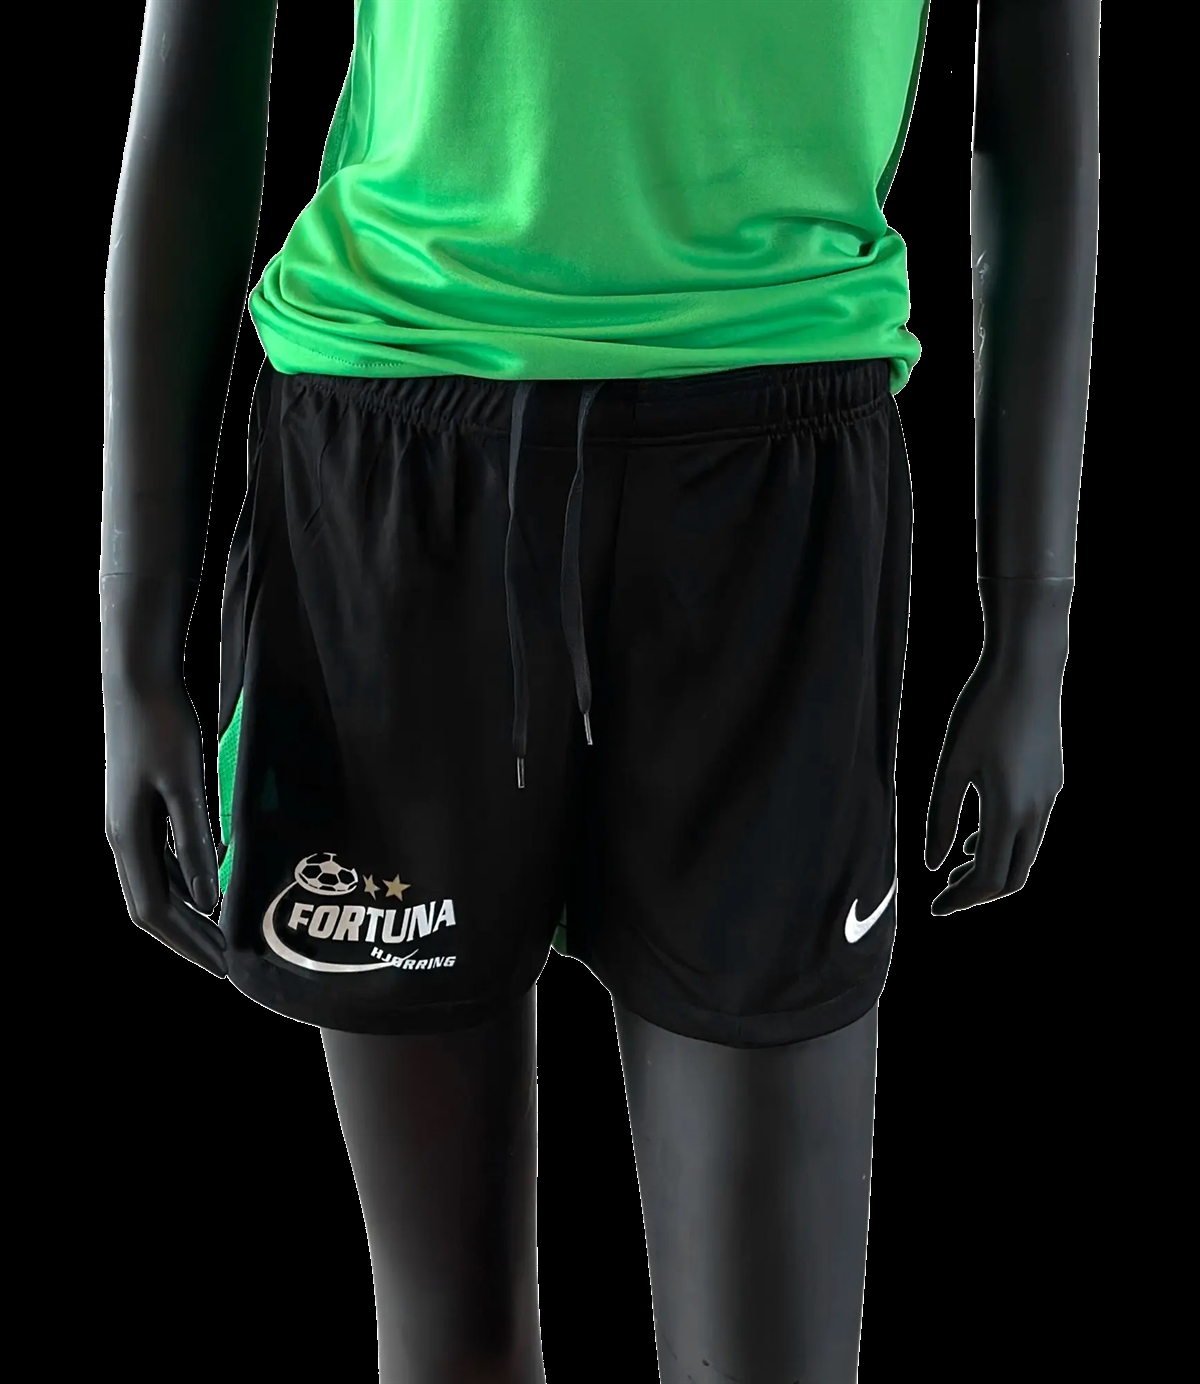 Official Fortuna Running Shorts